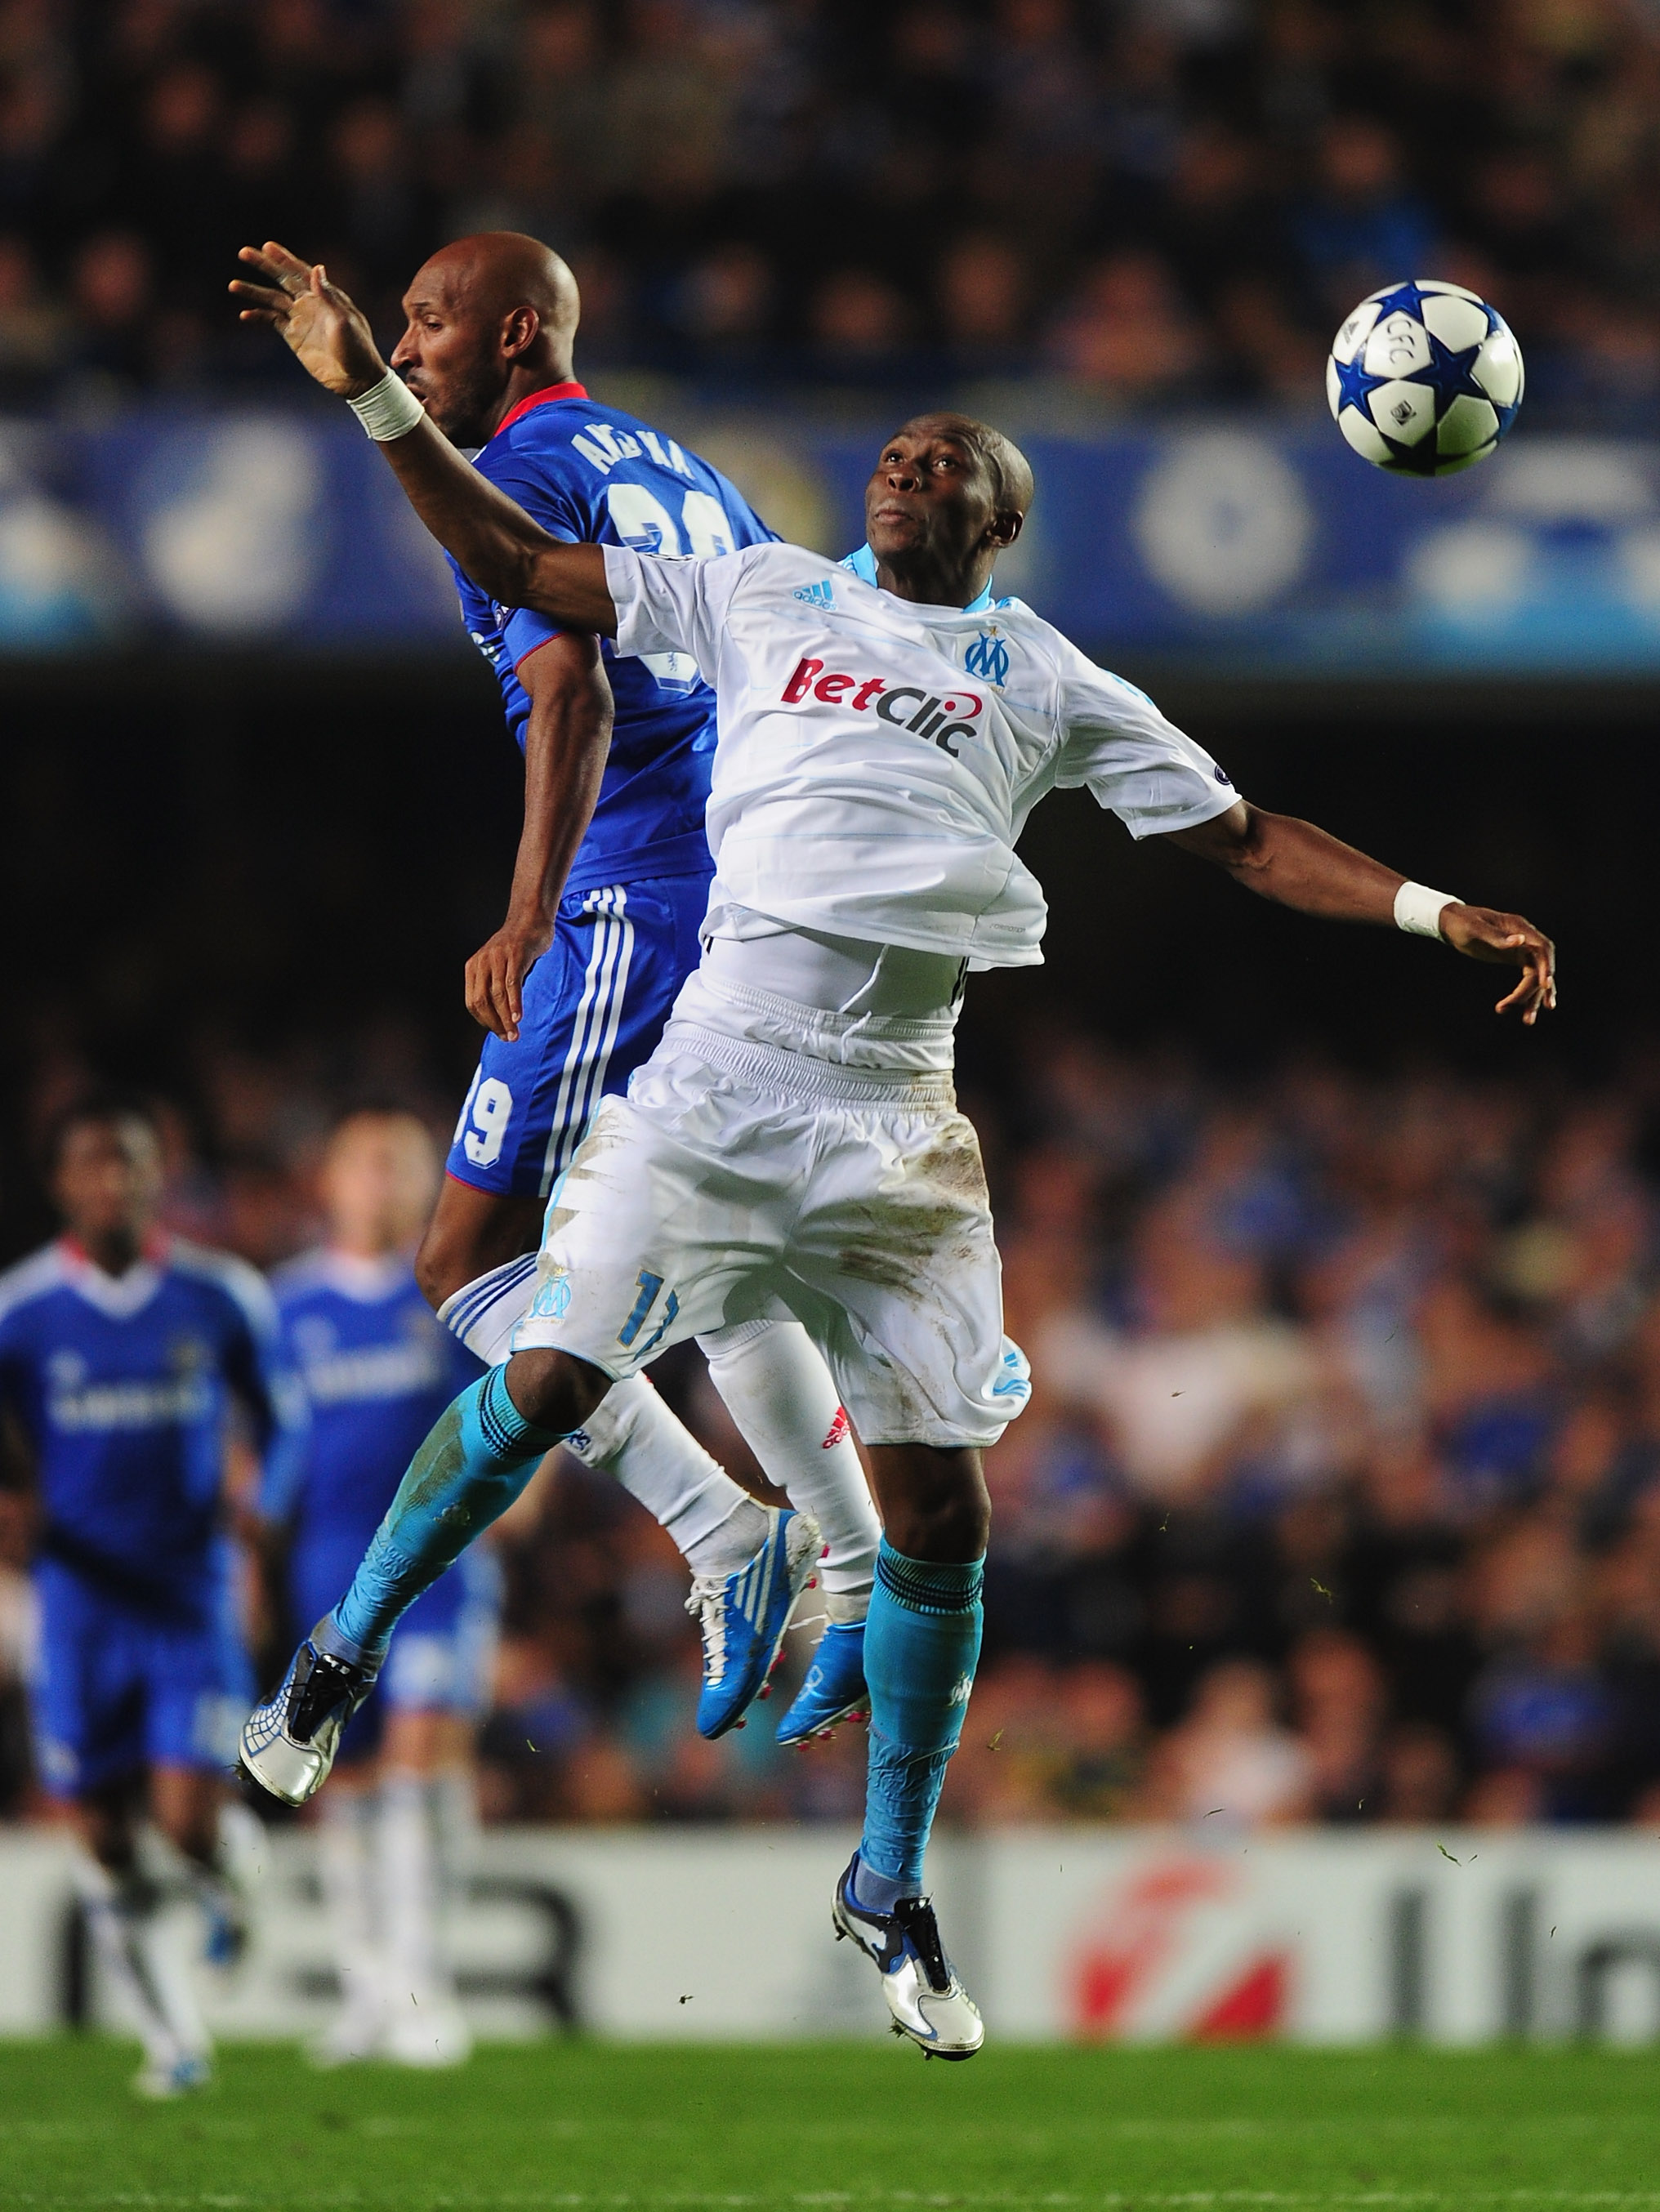 LONDON, ENGLAND - SEPTEMBER 28:  Nicolas Anelka of Chelsea challenges Stephane Mbia of Marseille during the UEFA Champions League Group F match between Chelsea and Marseille at Stamford Bridge on September 28, 2010 in London, England.  (Photo by Mike Hewi